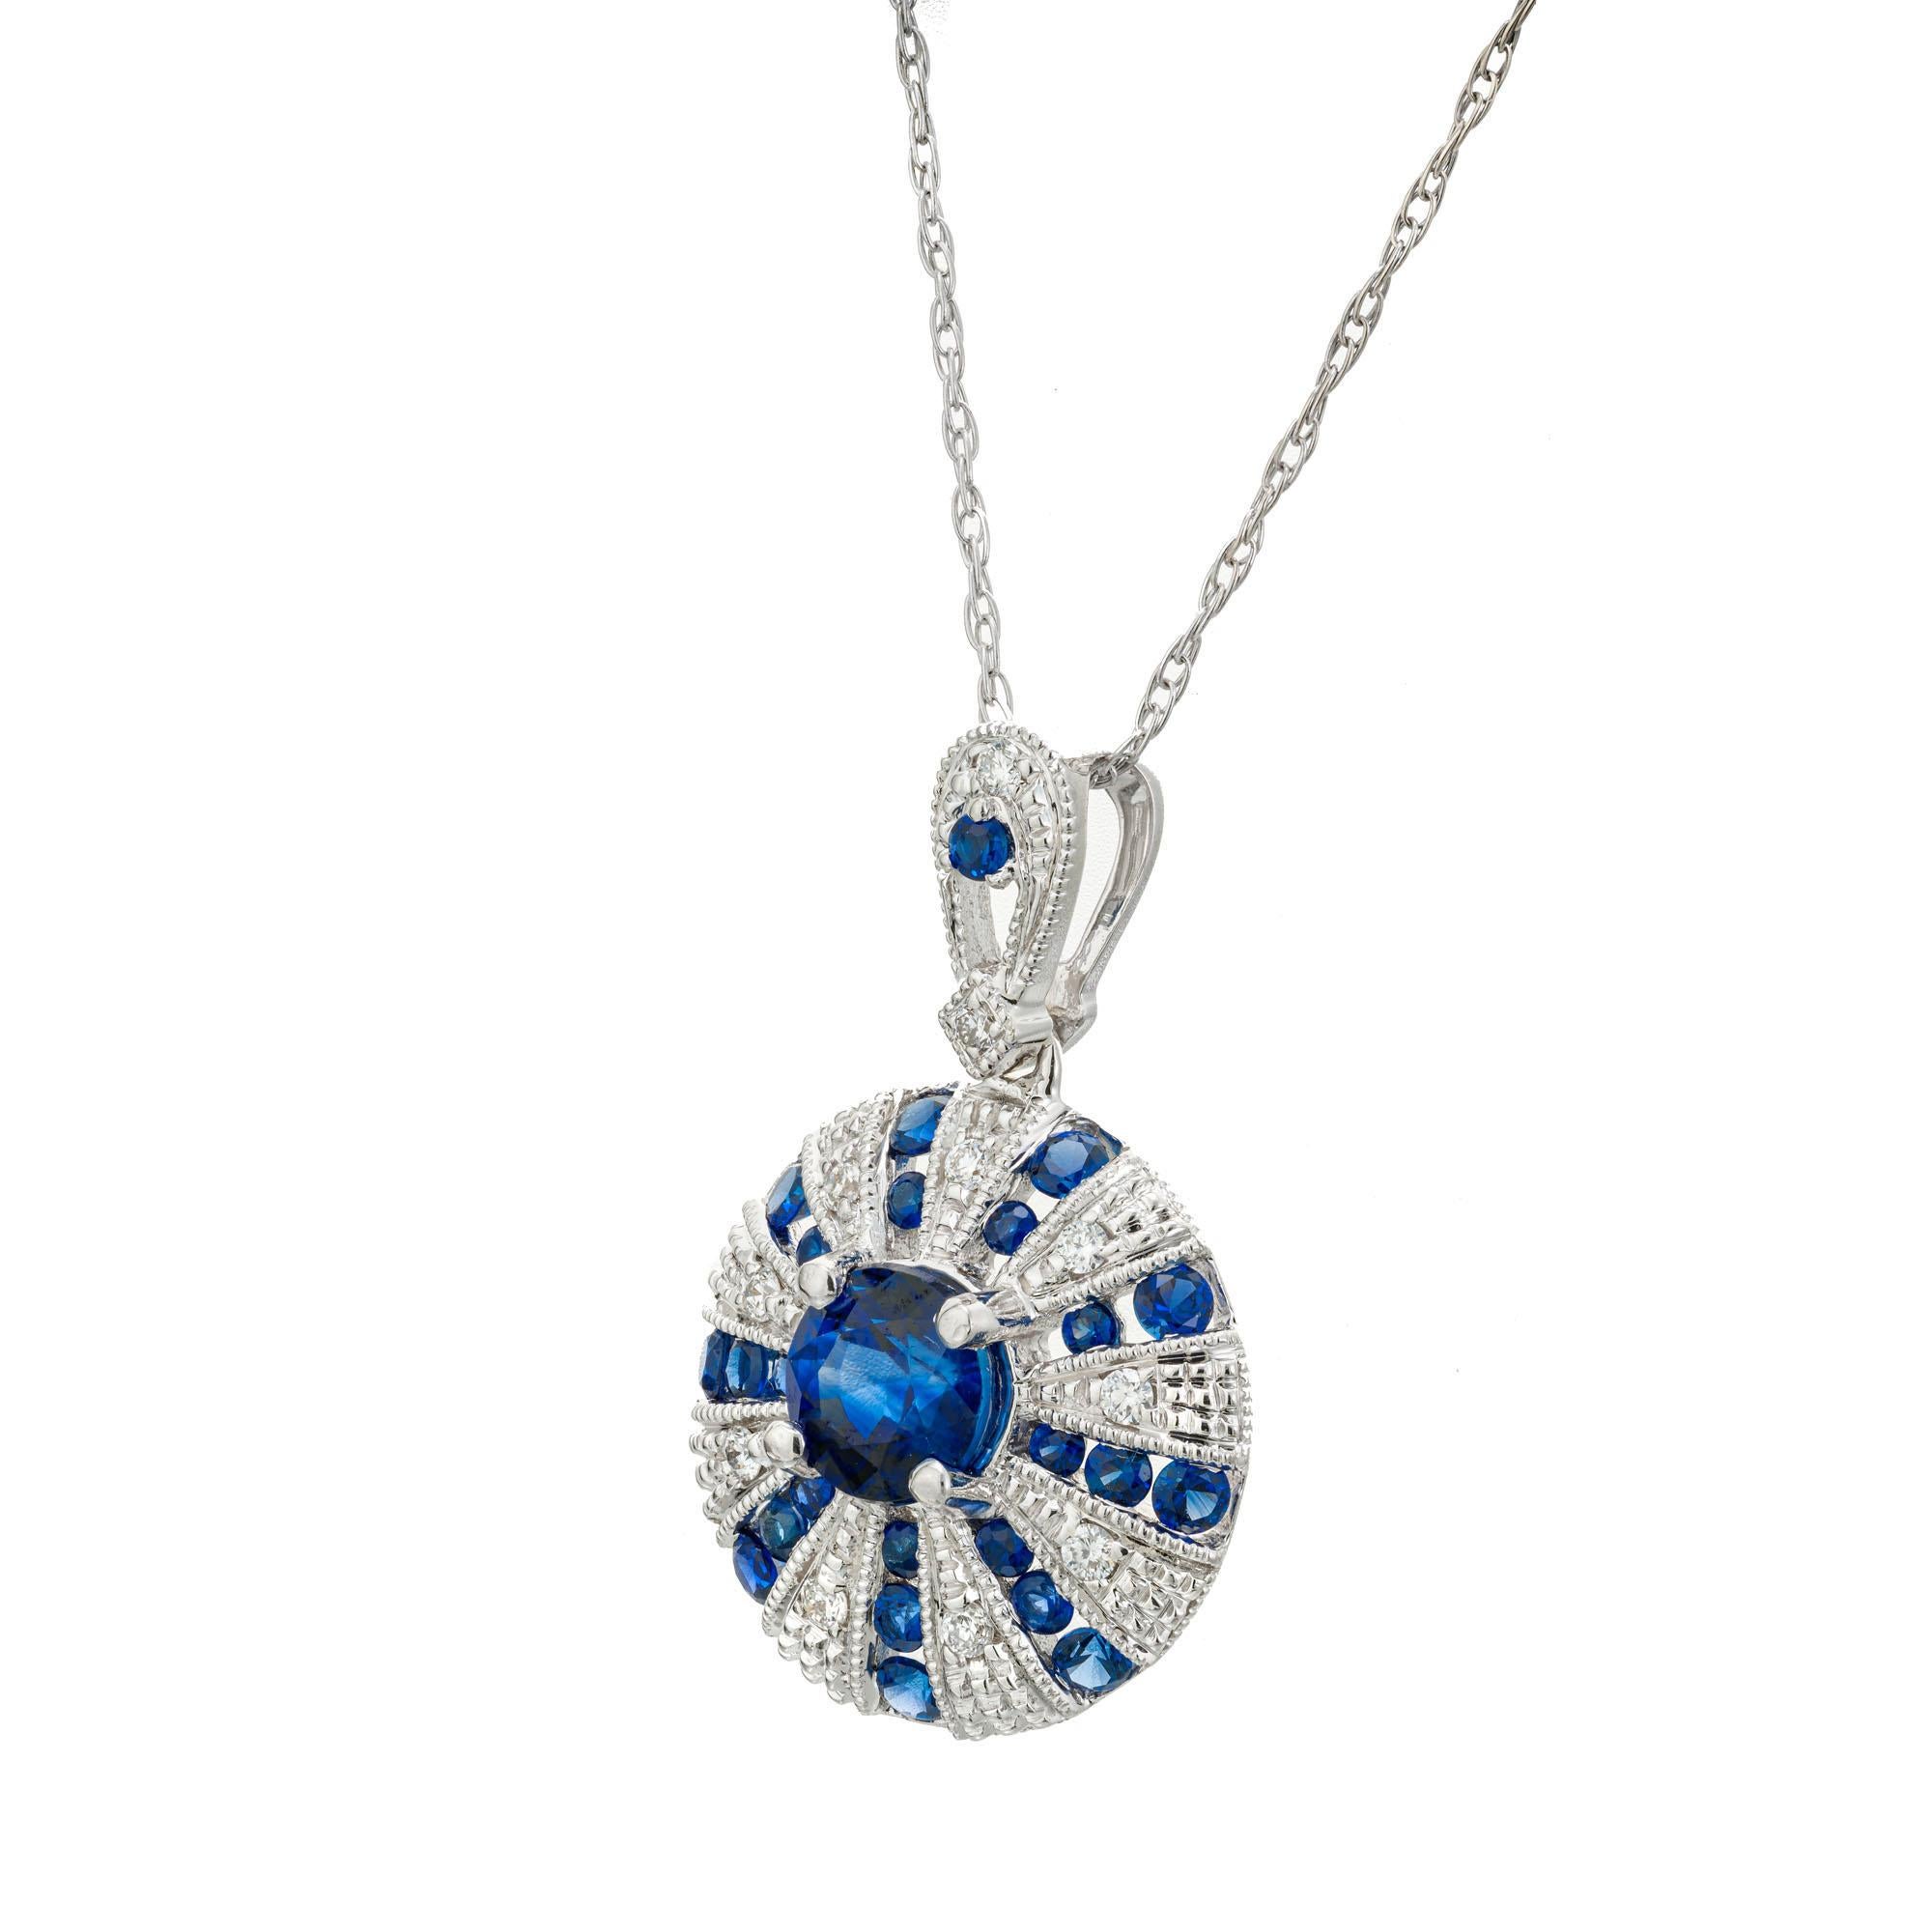 Sapphire and diamond pendant necklace. Art Deco style pendant with round blue sapphires and round brilliant cut diamonds set in 14k white gold. 18 inch white gold chain. Designed and crafted in the Peter Suchy workshop

1 round blue sapphire,